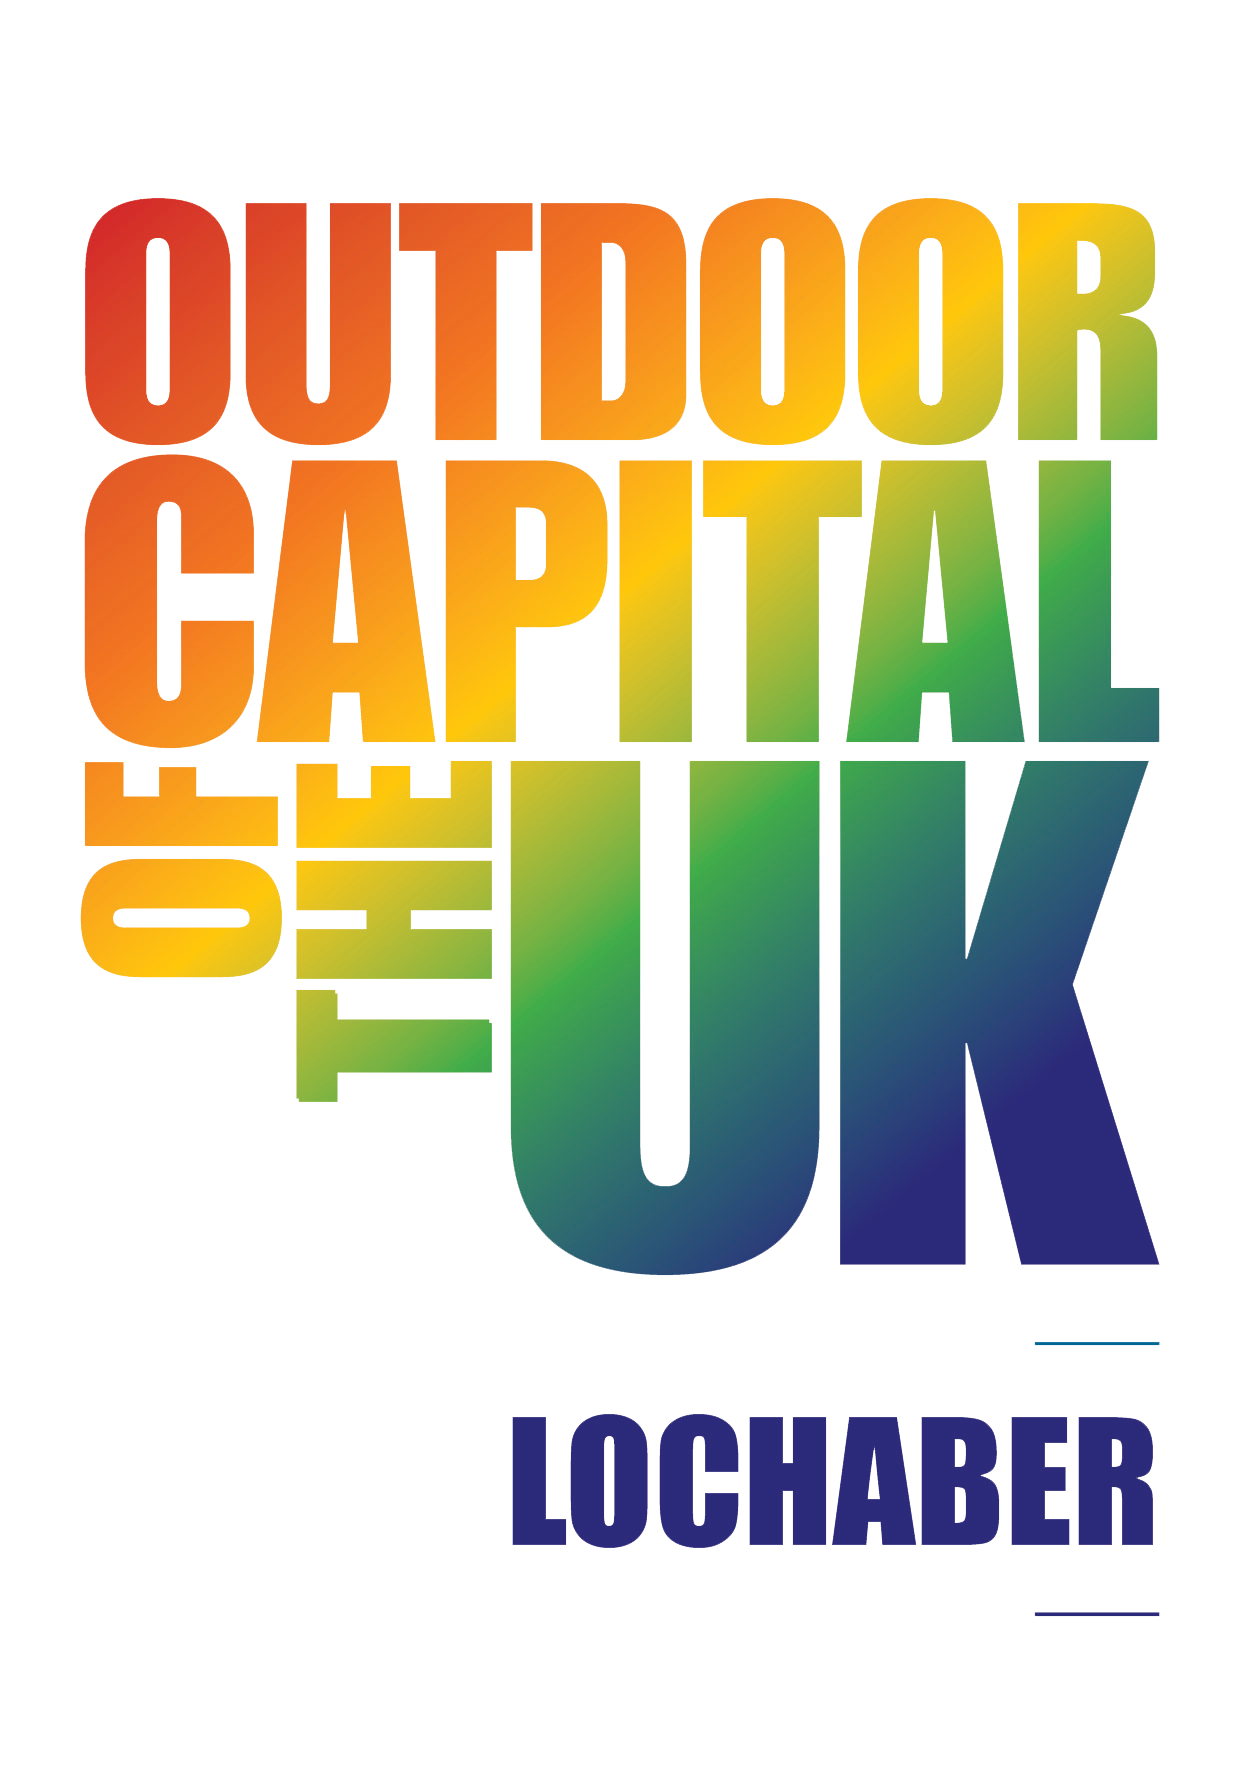 Outdoor capital of the UK logo